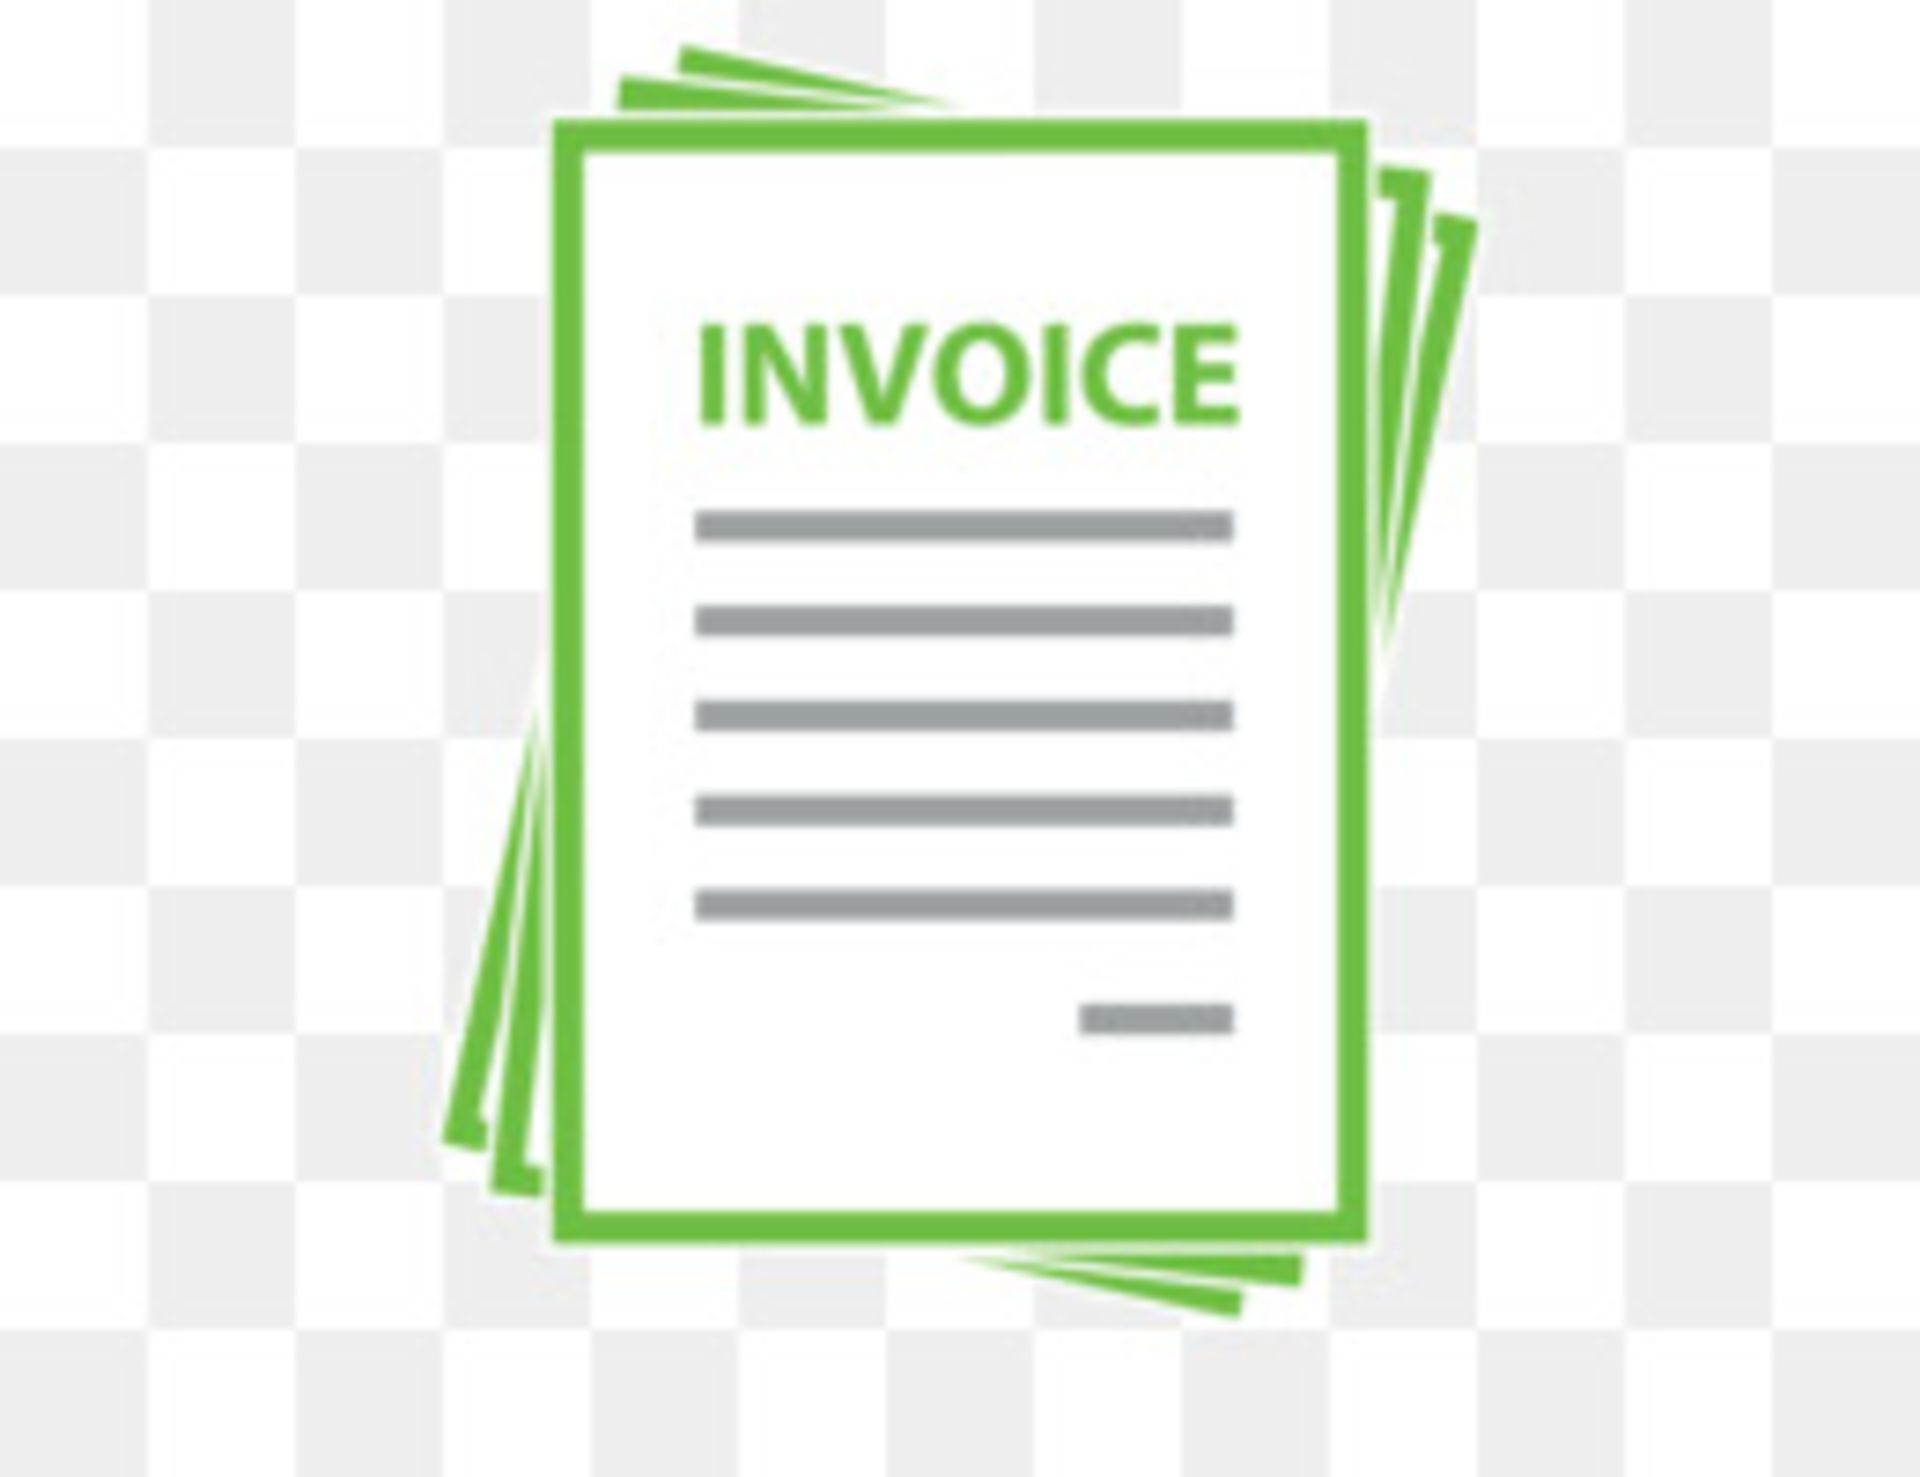 You Will Receive An Invoice At The End Of The Auction On Friday For Any Items That You Have Won.